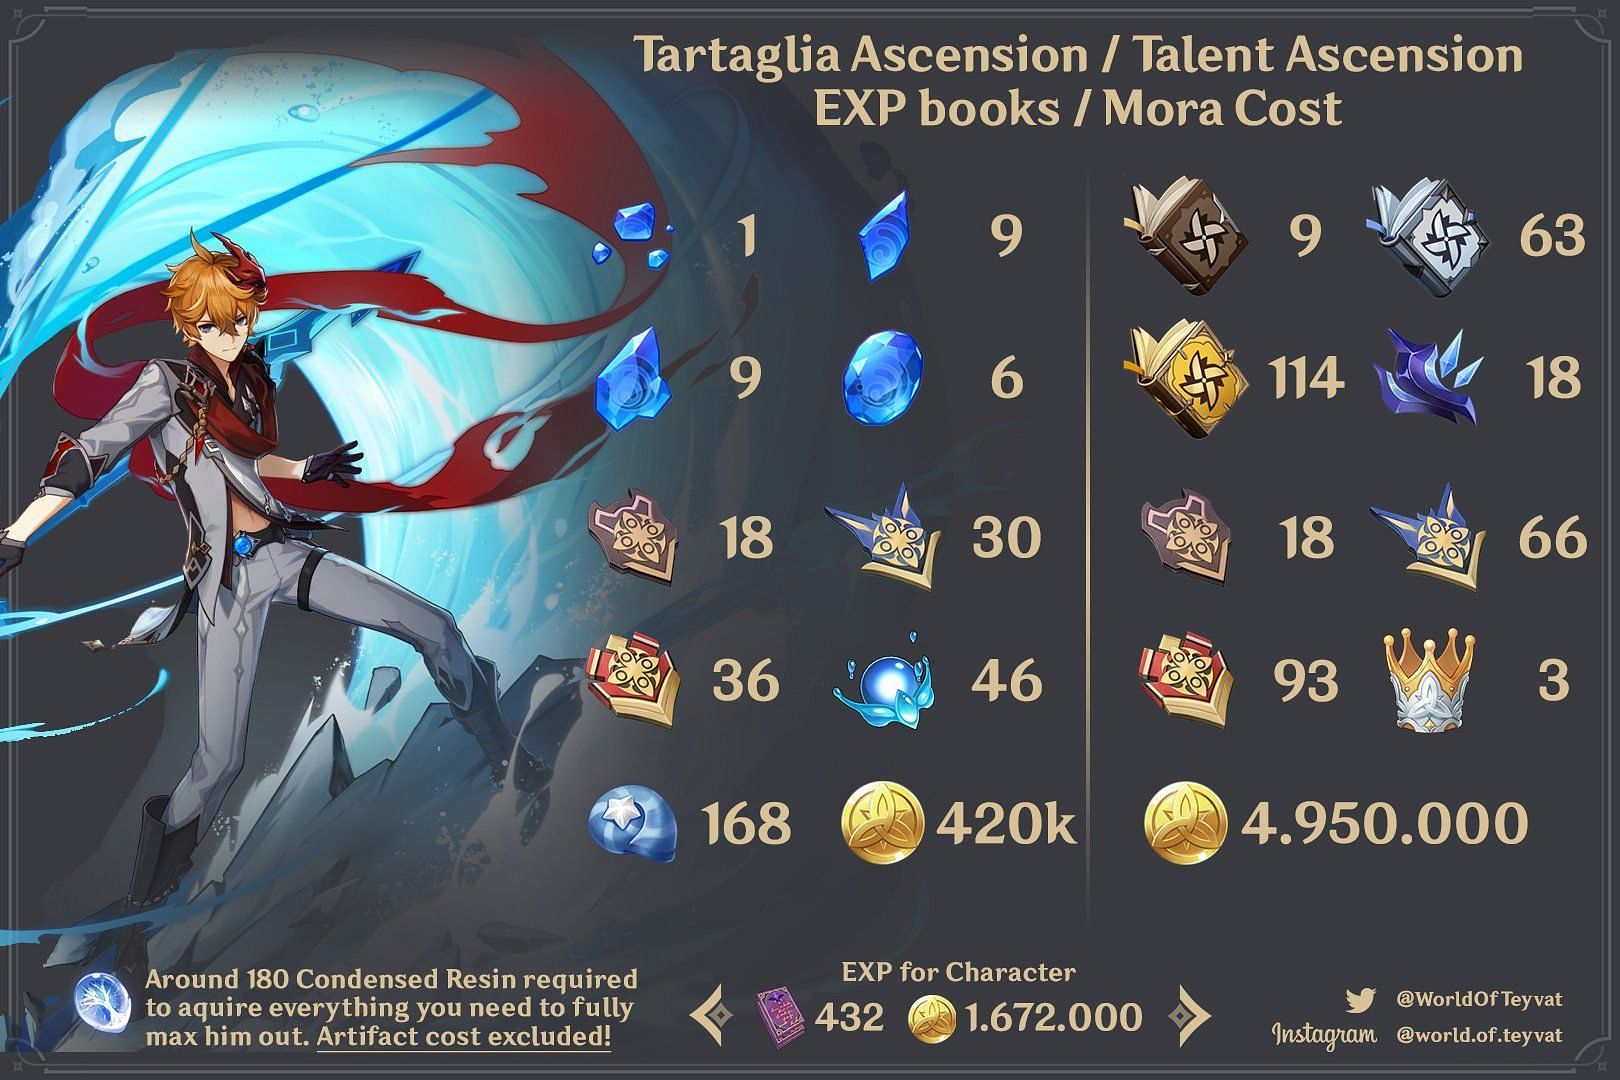 Childe ascension and talents materials (Image via Twitter/WorldOfTeyvat)